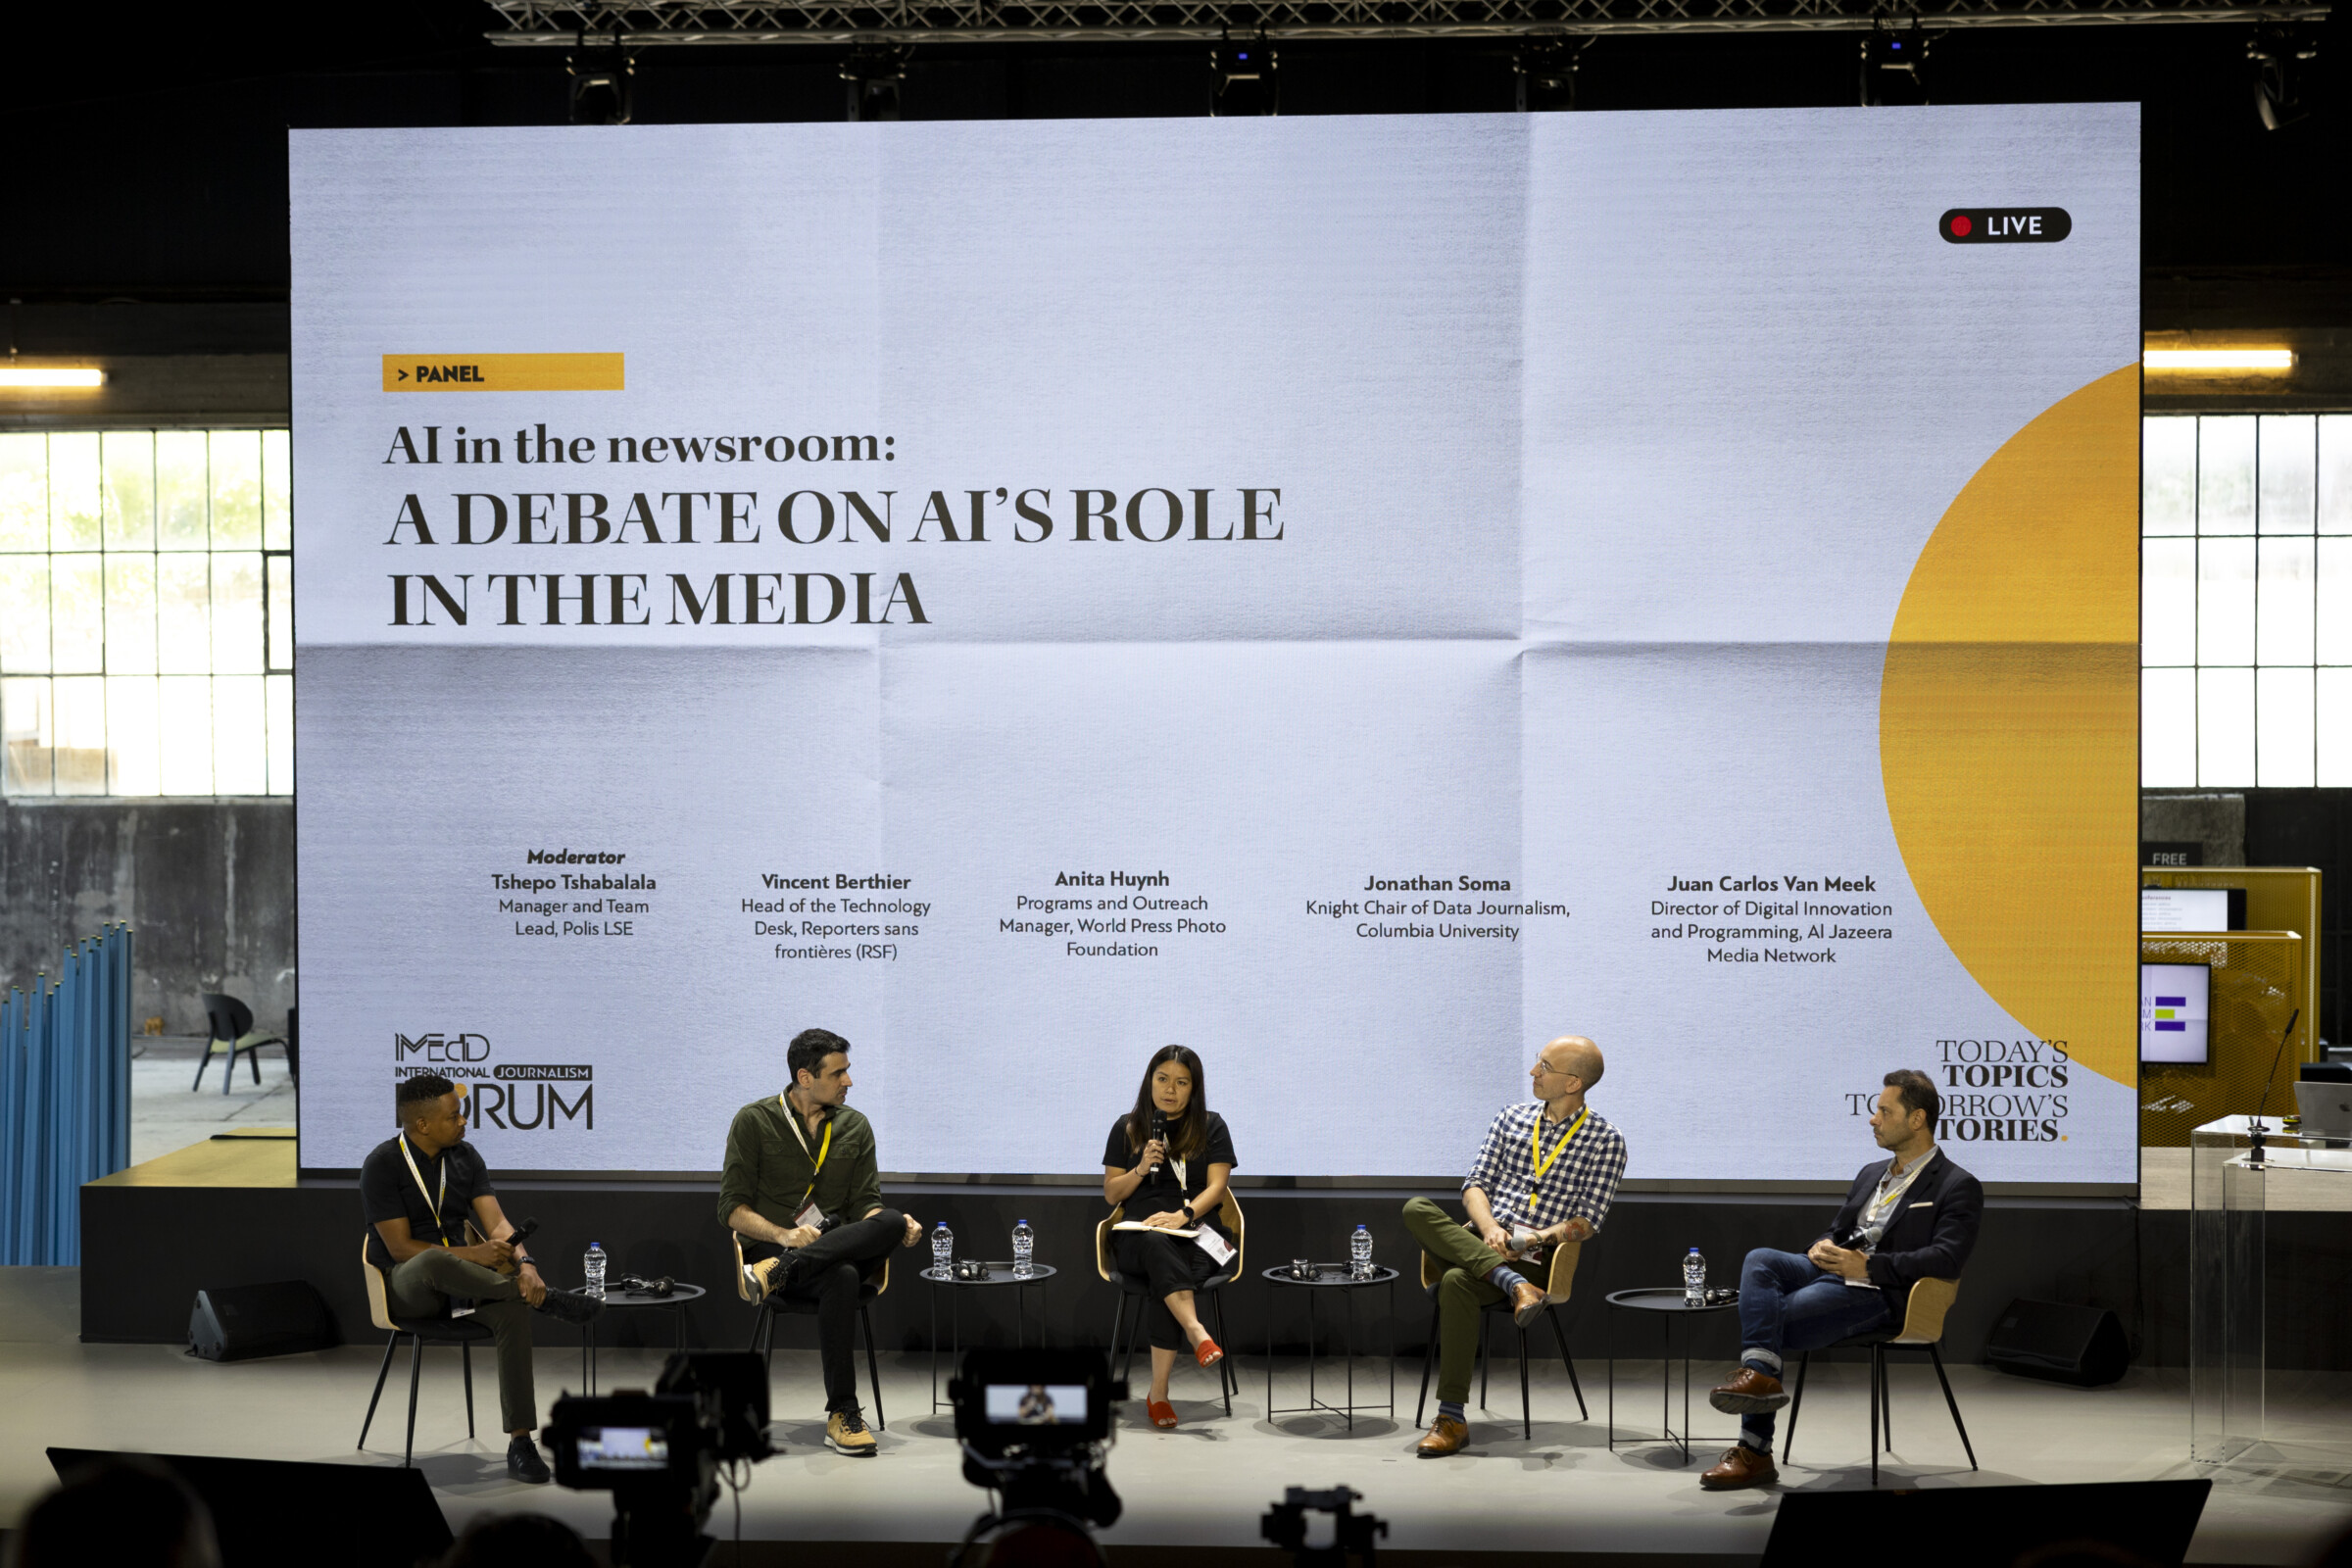 On a stage five people are sitting in front of a big white and yellow scrin that writes "AI in the Newsroom: A Debate on AI's Role in the Media". The woman in the center, dressed in black, is holding the microphone. The other four men of the panel are all listening to her. 